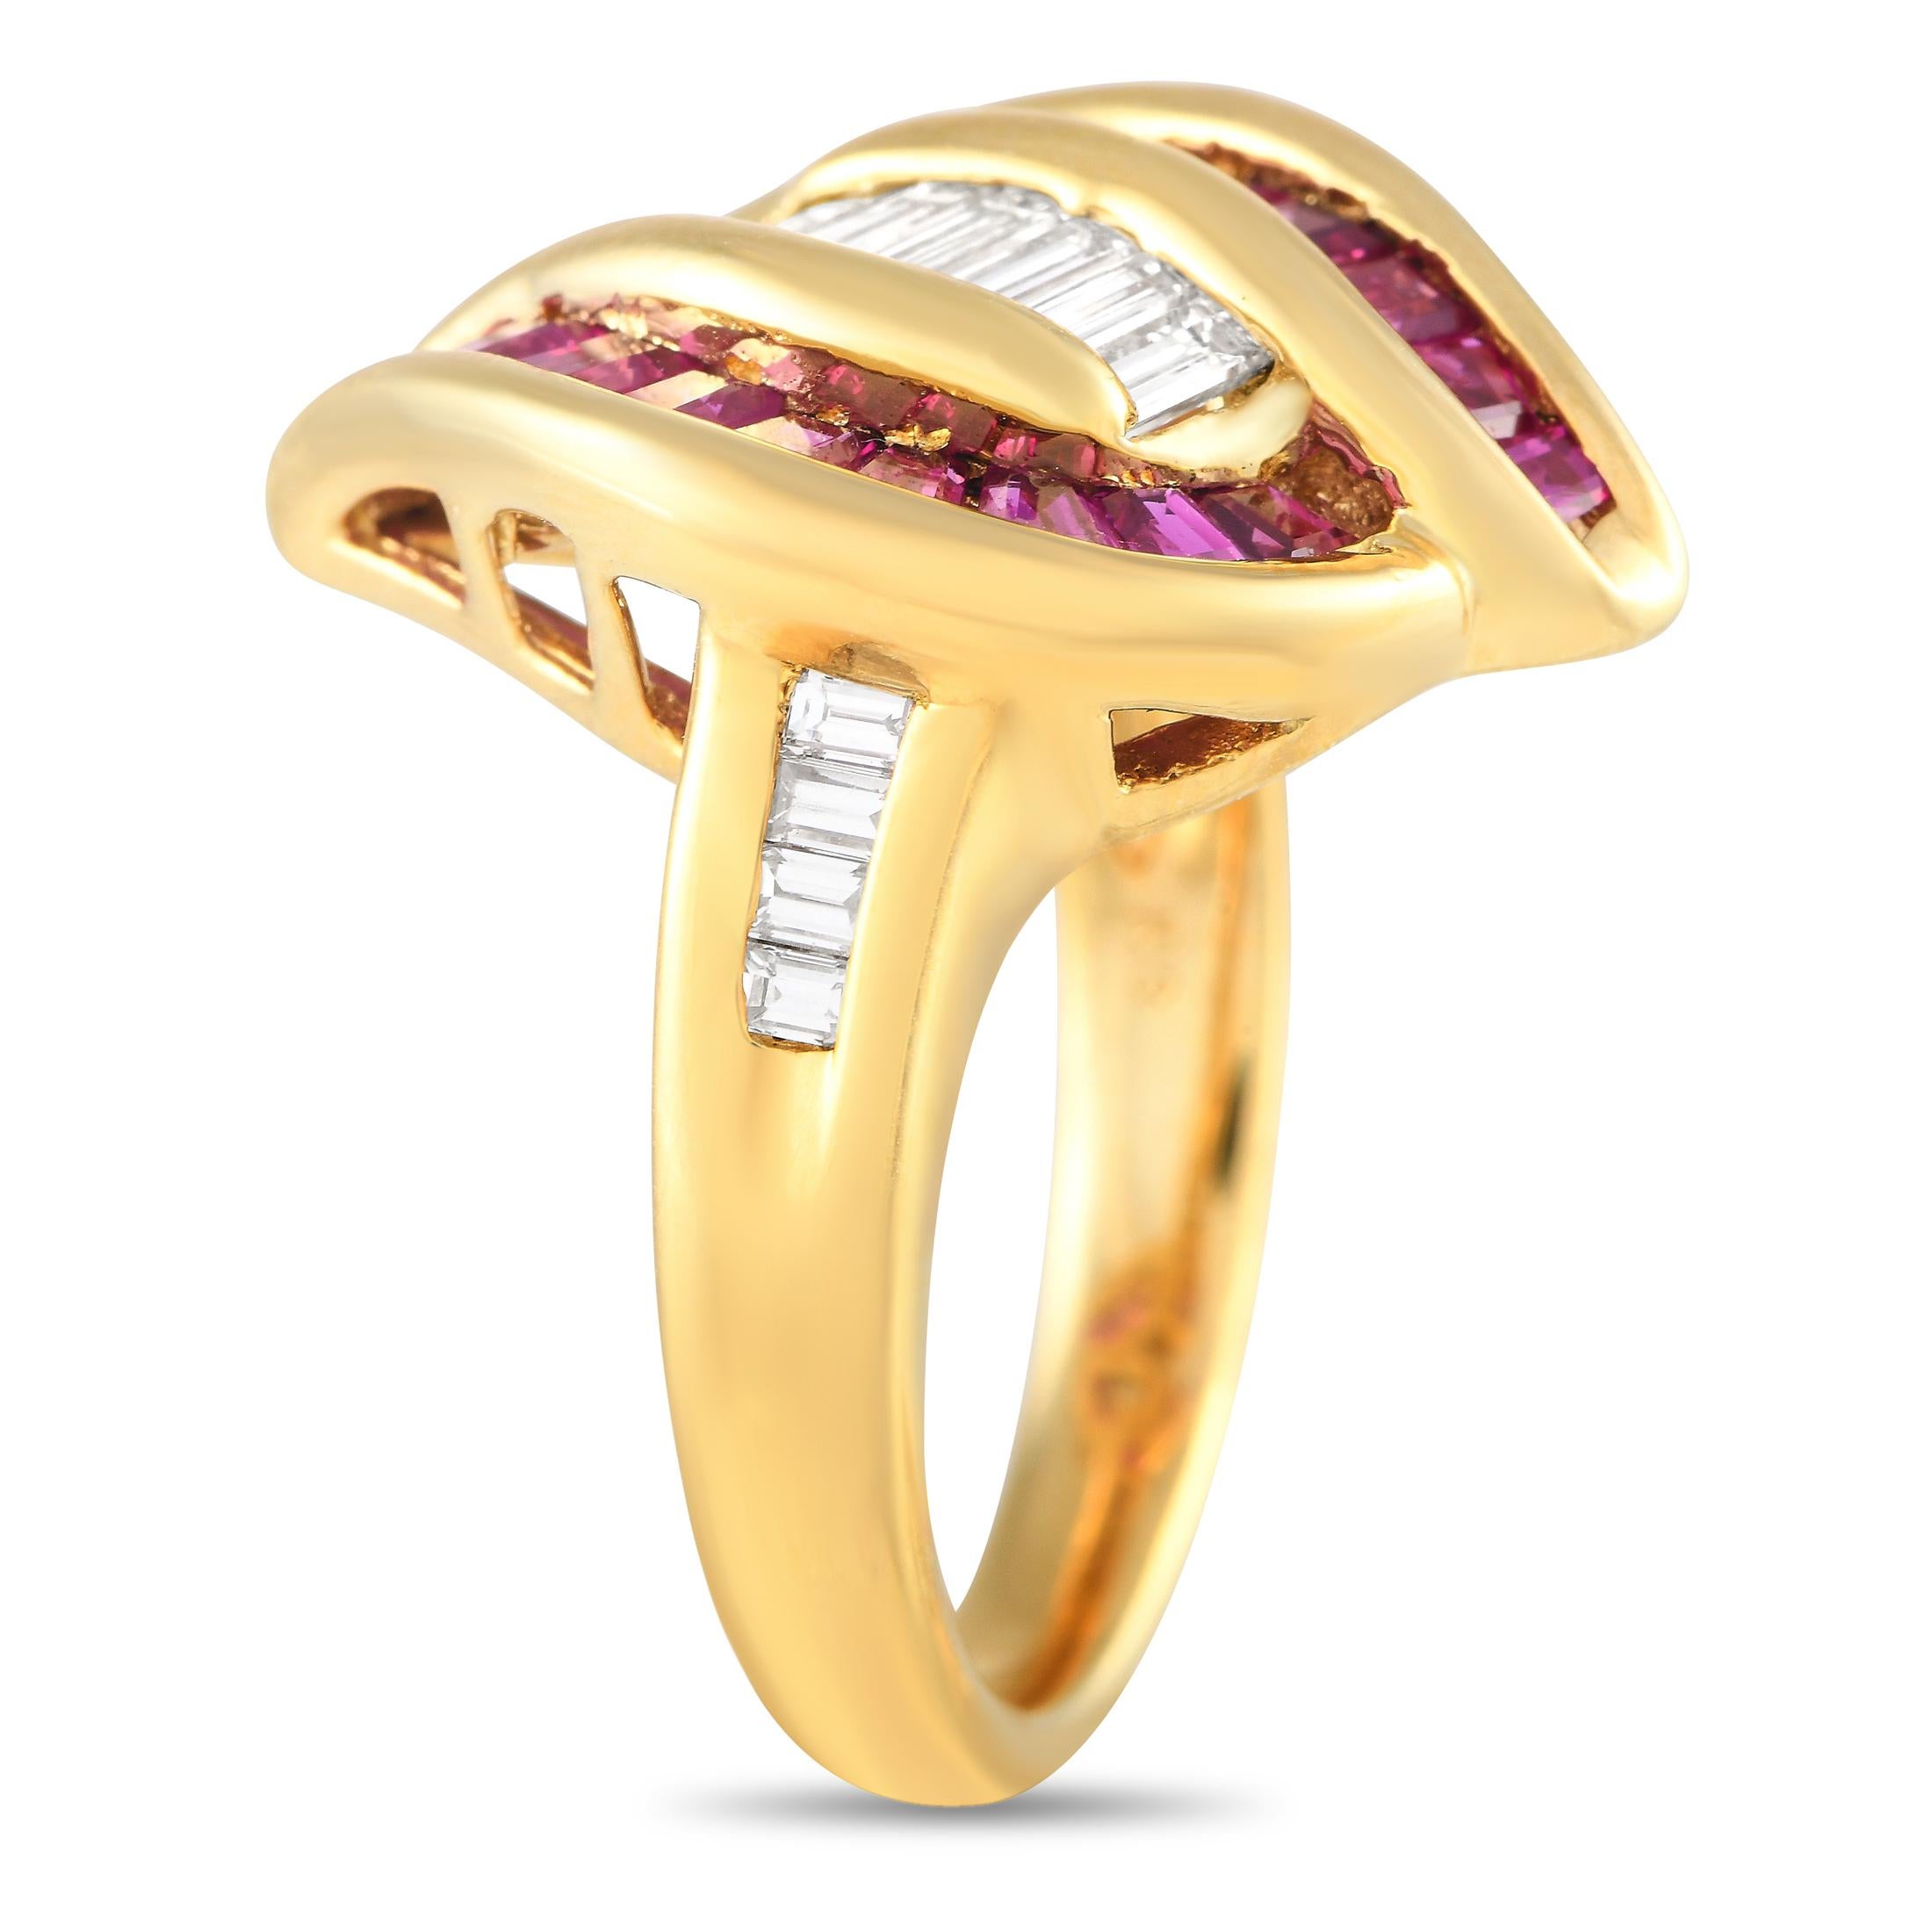 Make a bold statement of sophistication with this diamond and ruby ring. It features an 18K yellow-gold band with shoulders detailed with channel-set baguette diamonds. The curvy centerpiece is decorated with double waves of rubies on a channel